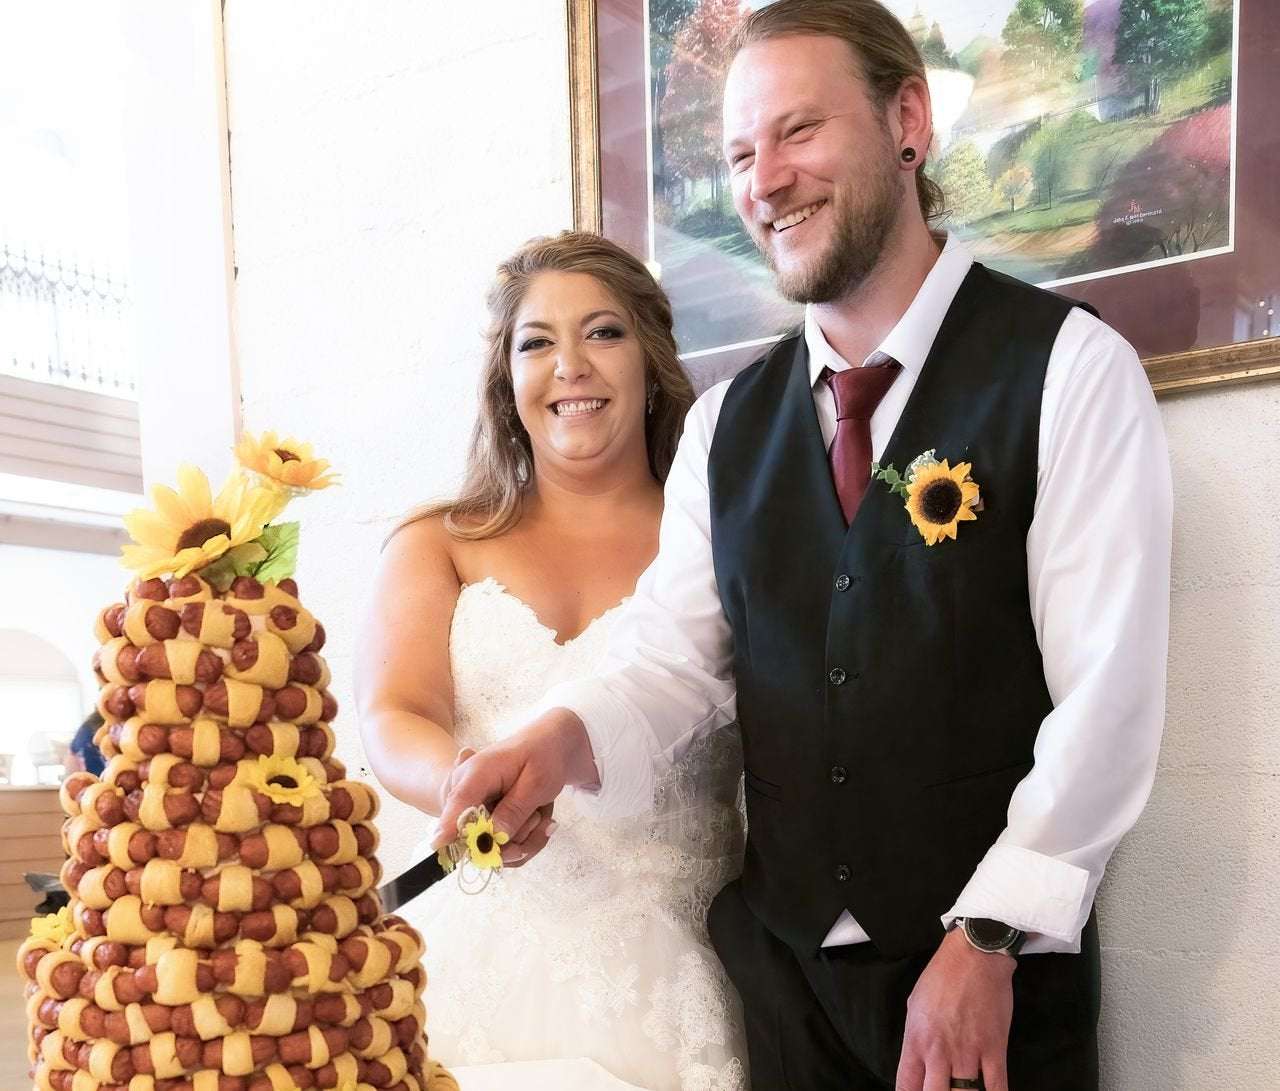 image for Michigan couple gifted custom, four-tiered cocktail sausage cake on their wedding day